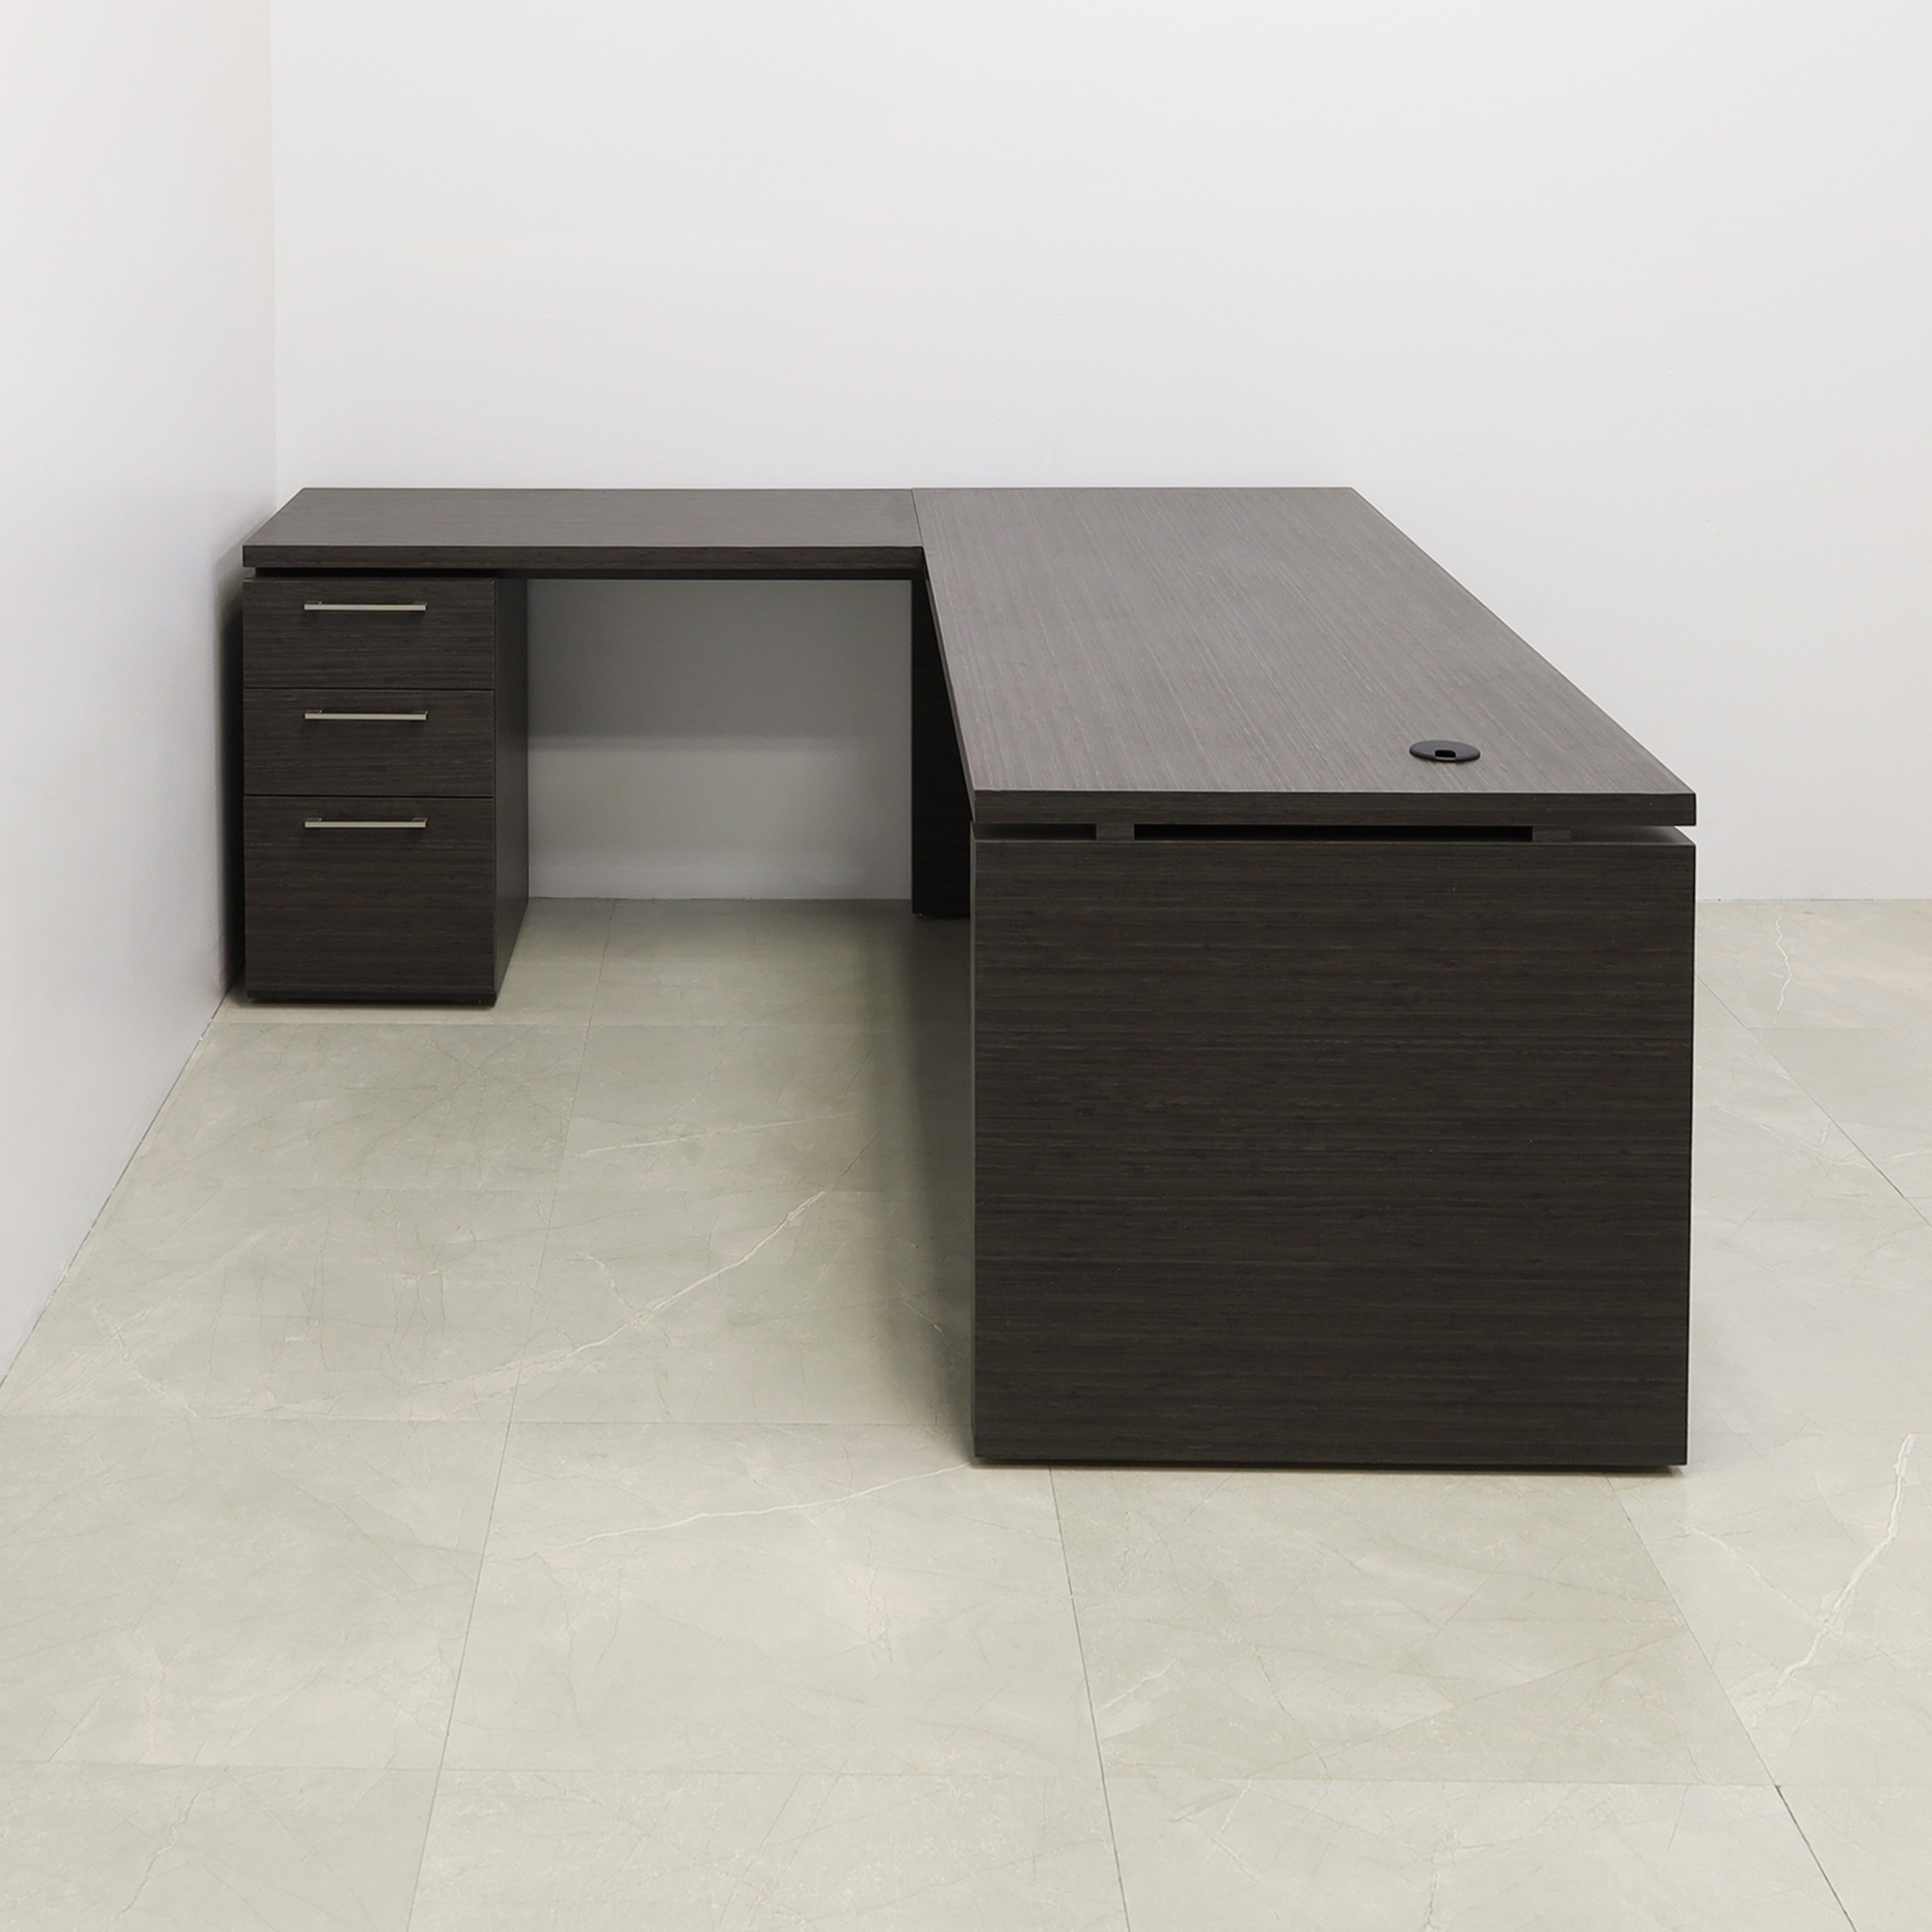 72-inch Denver L-Shape Executive Desk With Cabinet and Laminate Top, left return & cabinet side when sitting, in special laminate top, base and storage, and black matte laminate privacy panel, shown here.